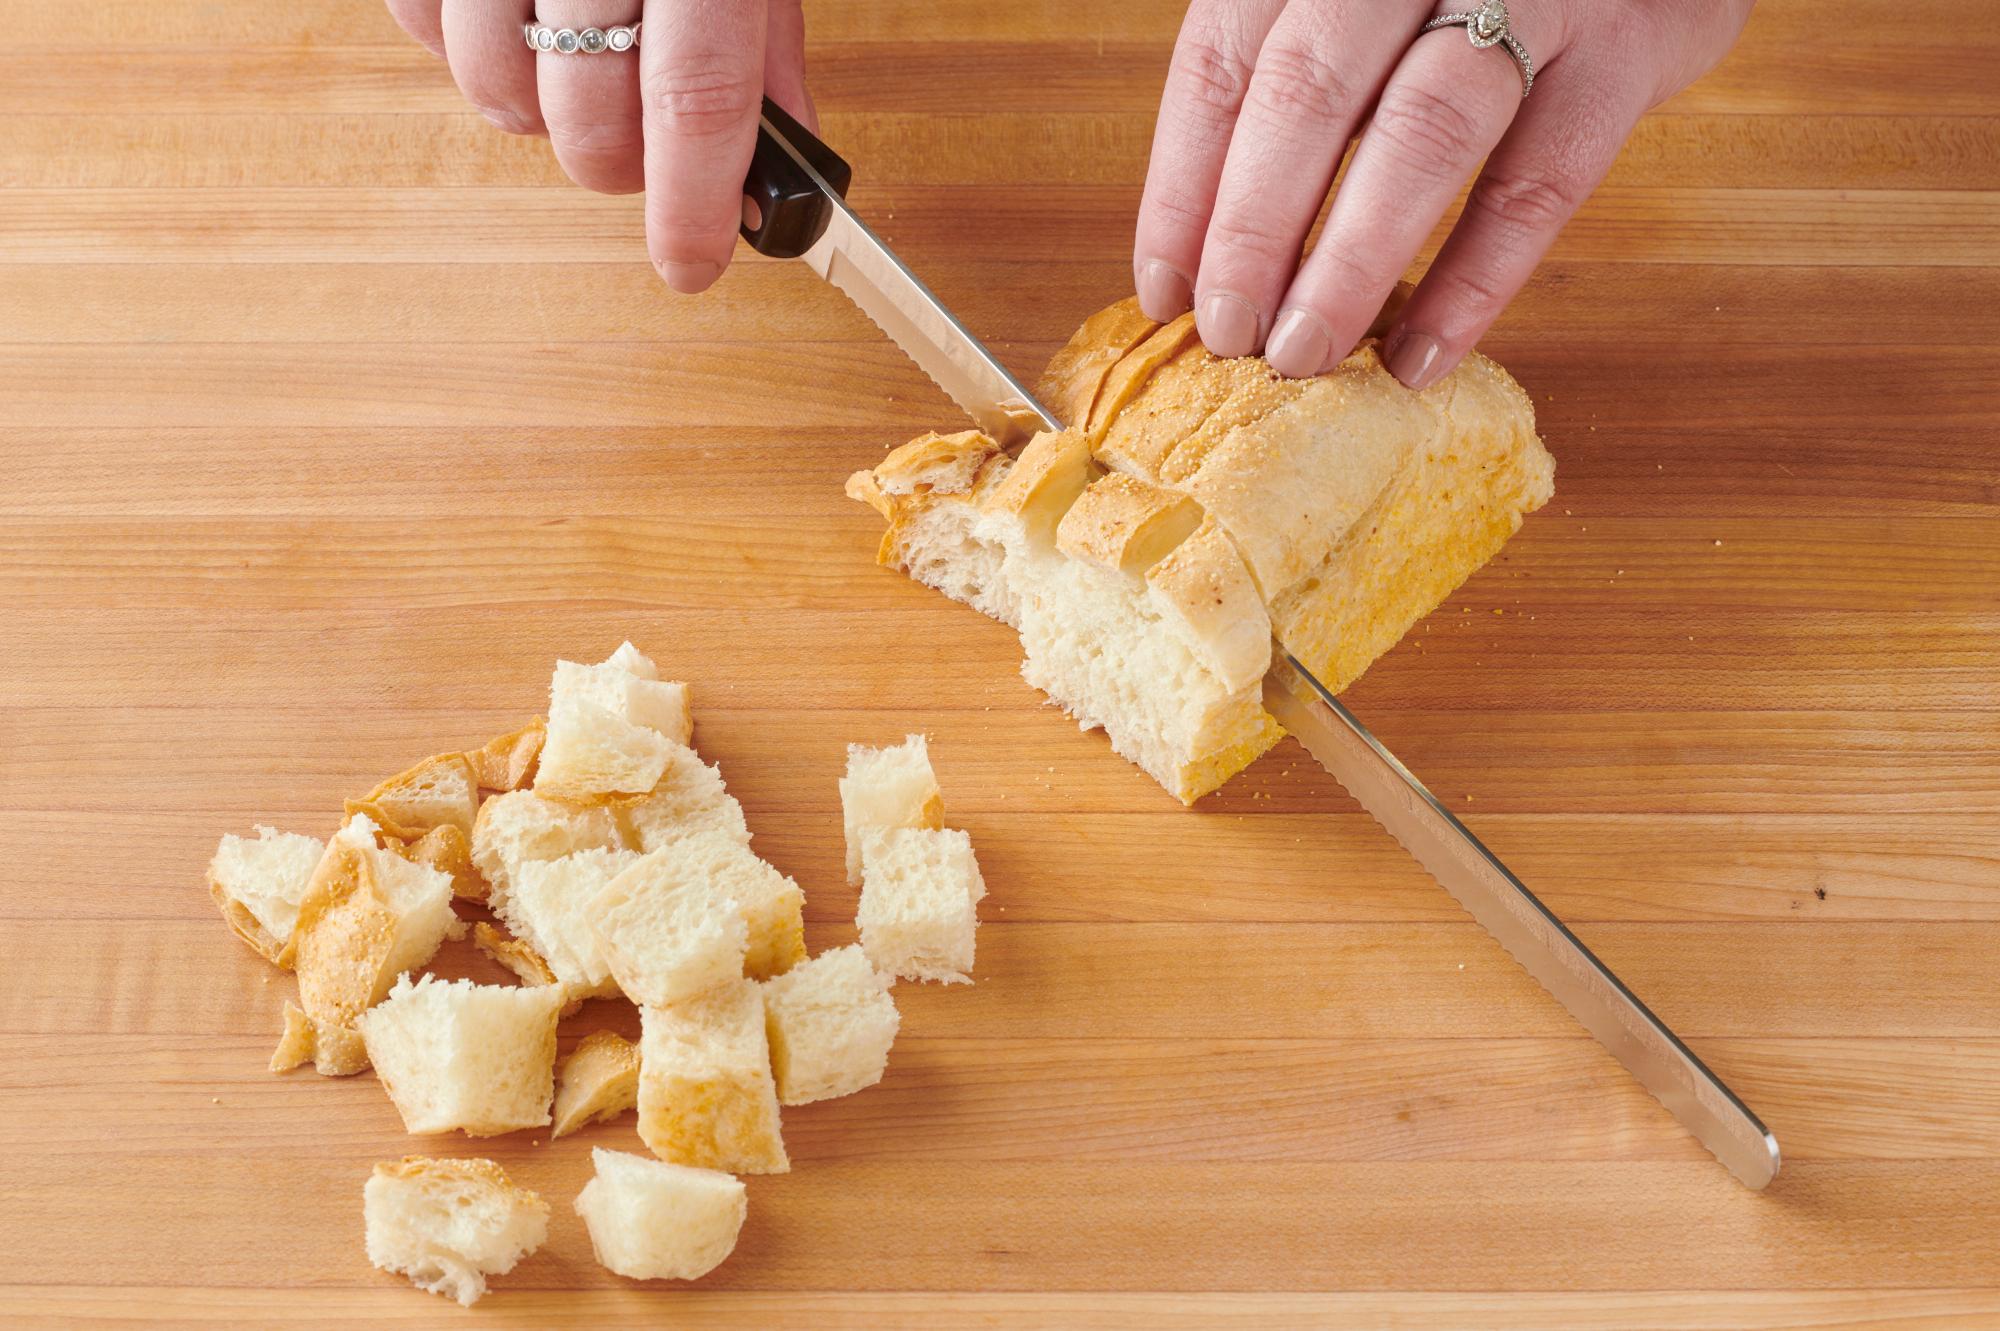 Cubing the bread with a Slicer.